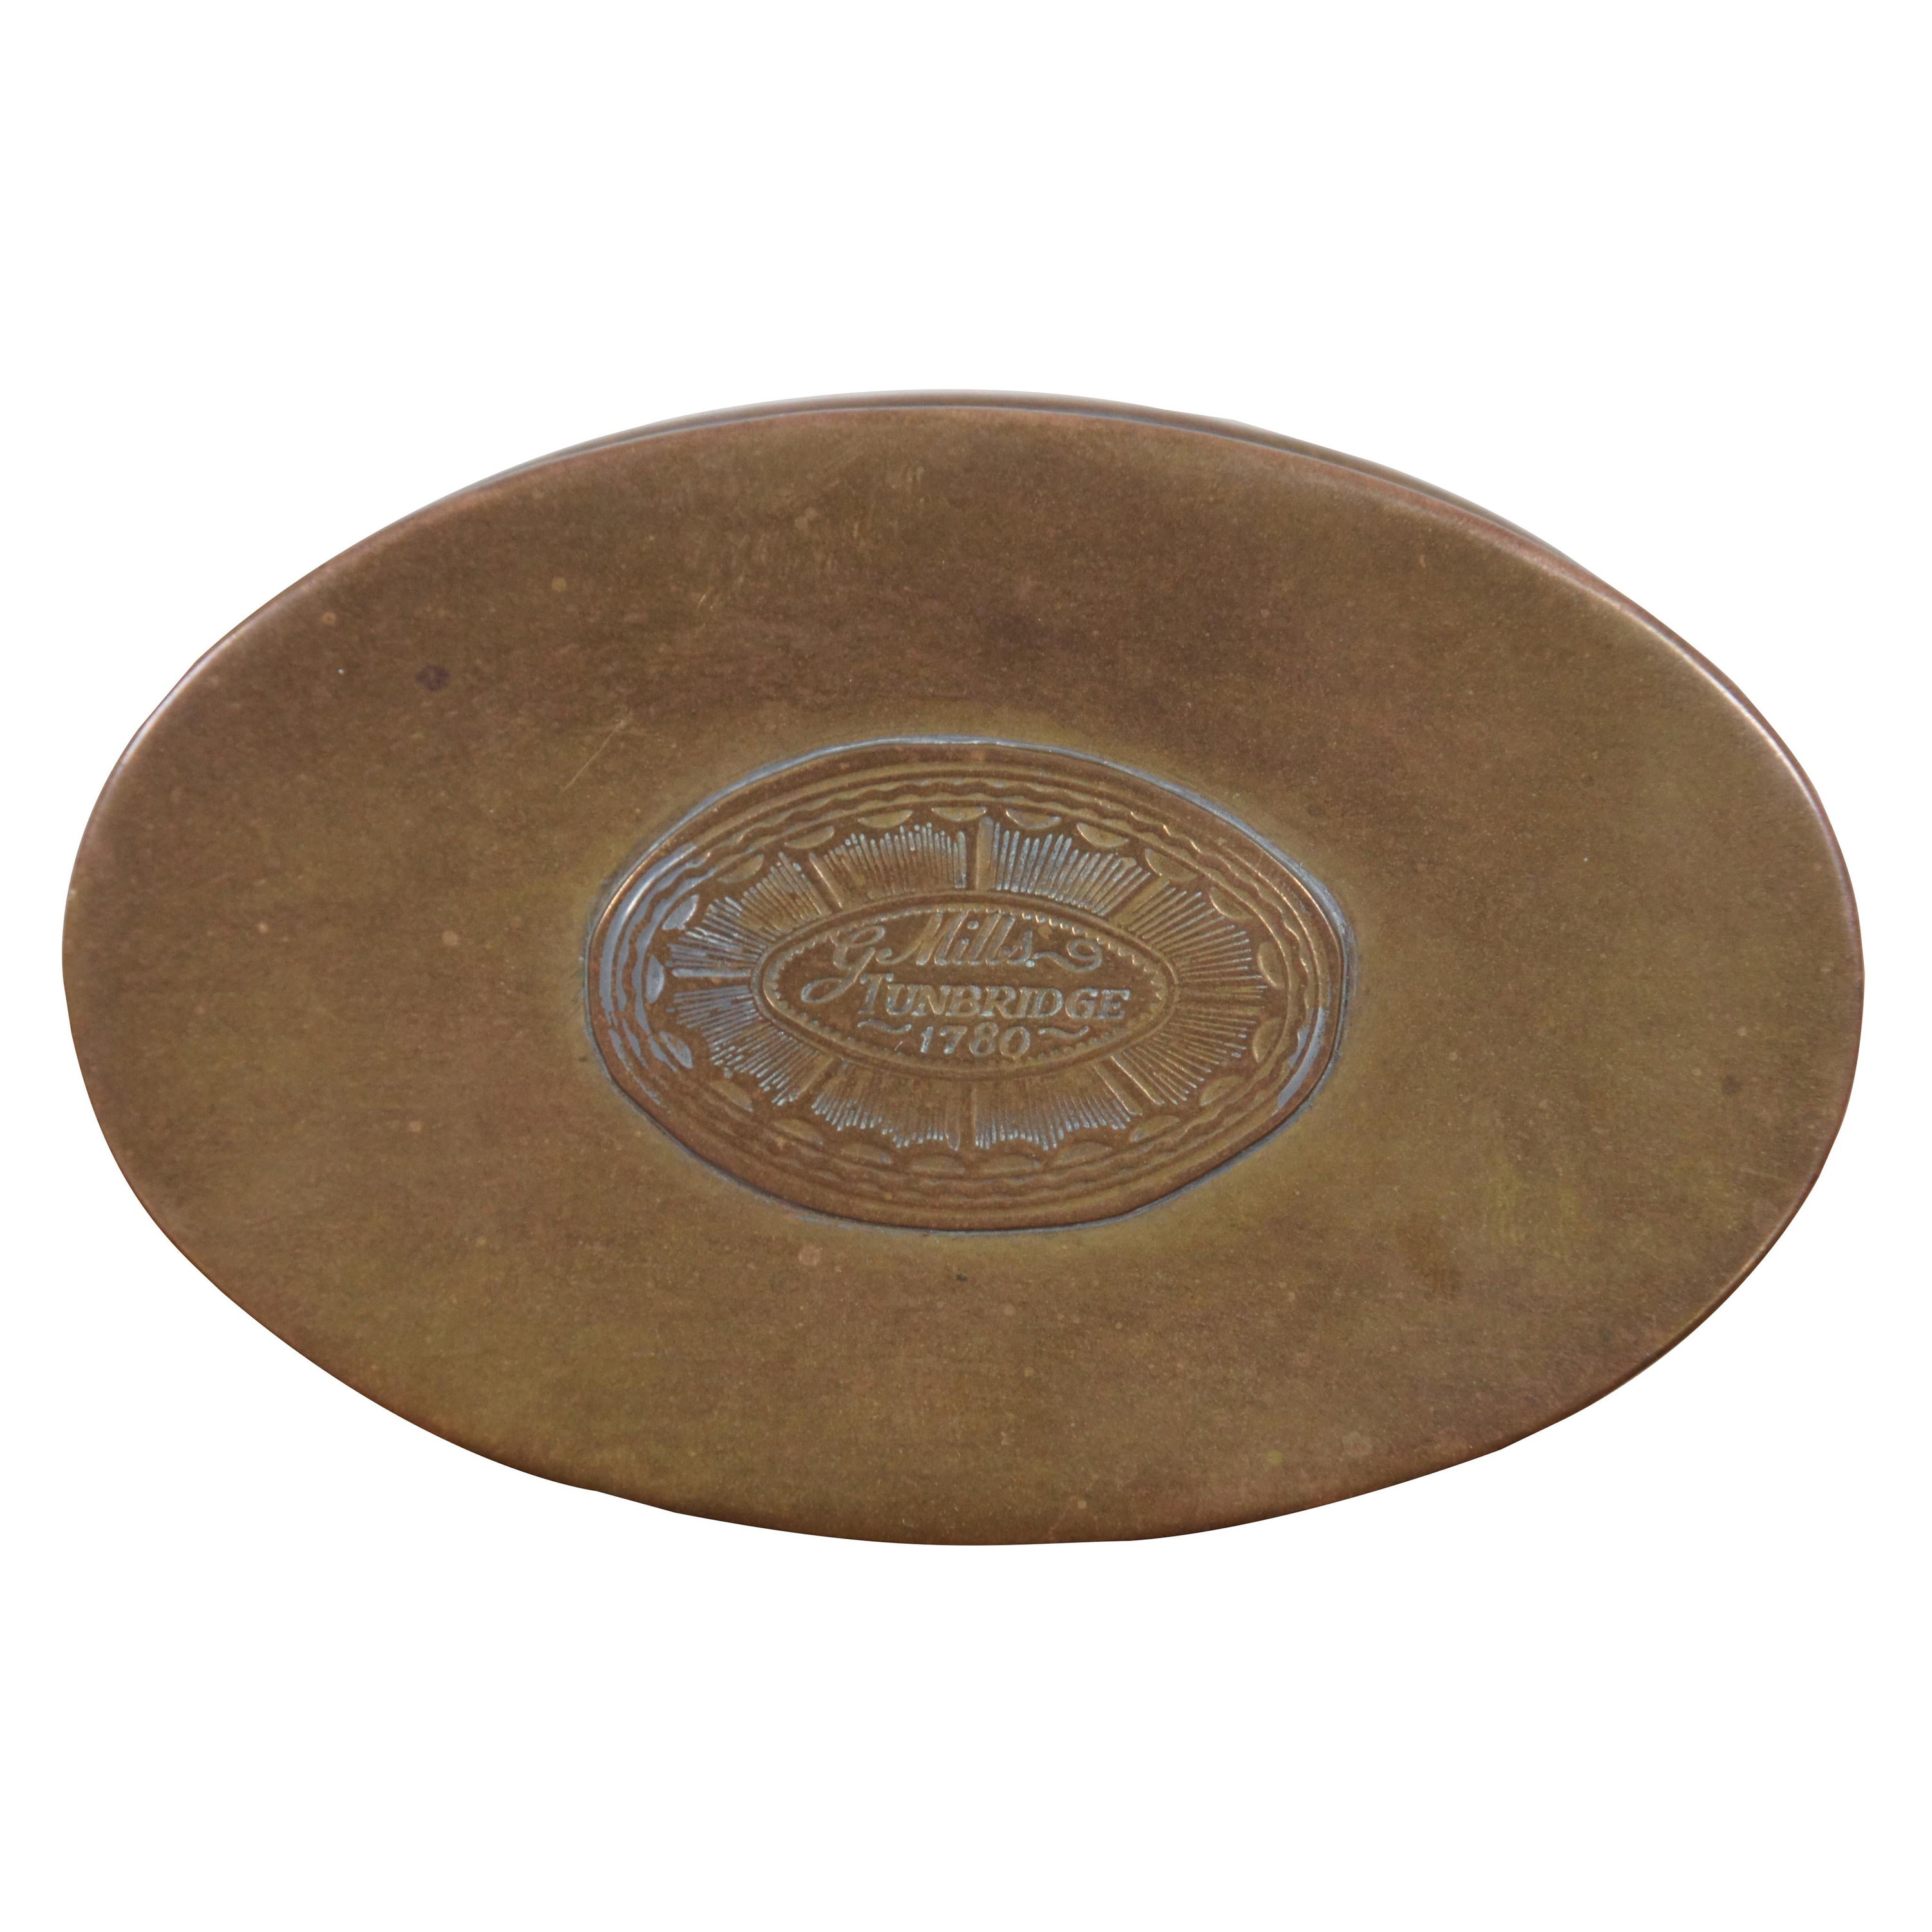 Antique 1780 Mottahedeh G Mills Tunbridge Oval Brass Tobacco Snuff Box For Sale